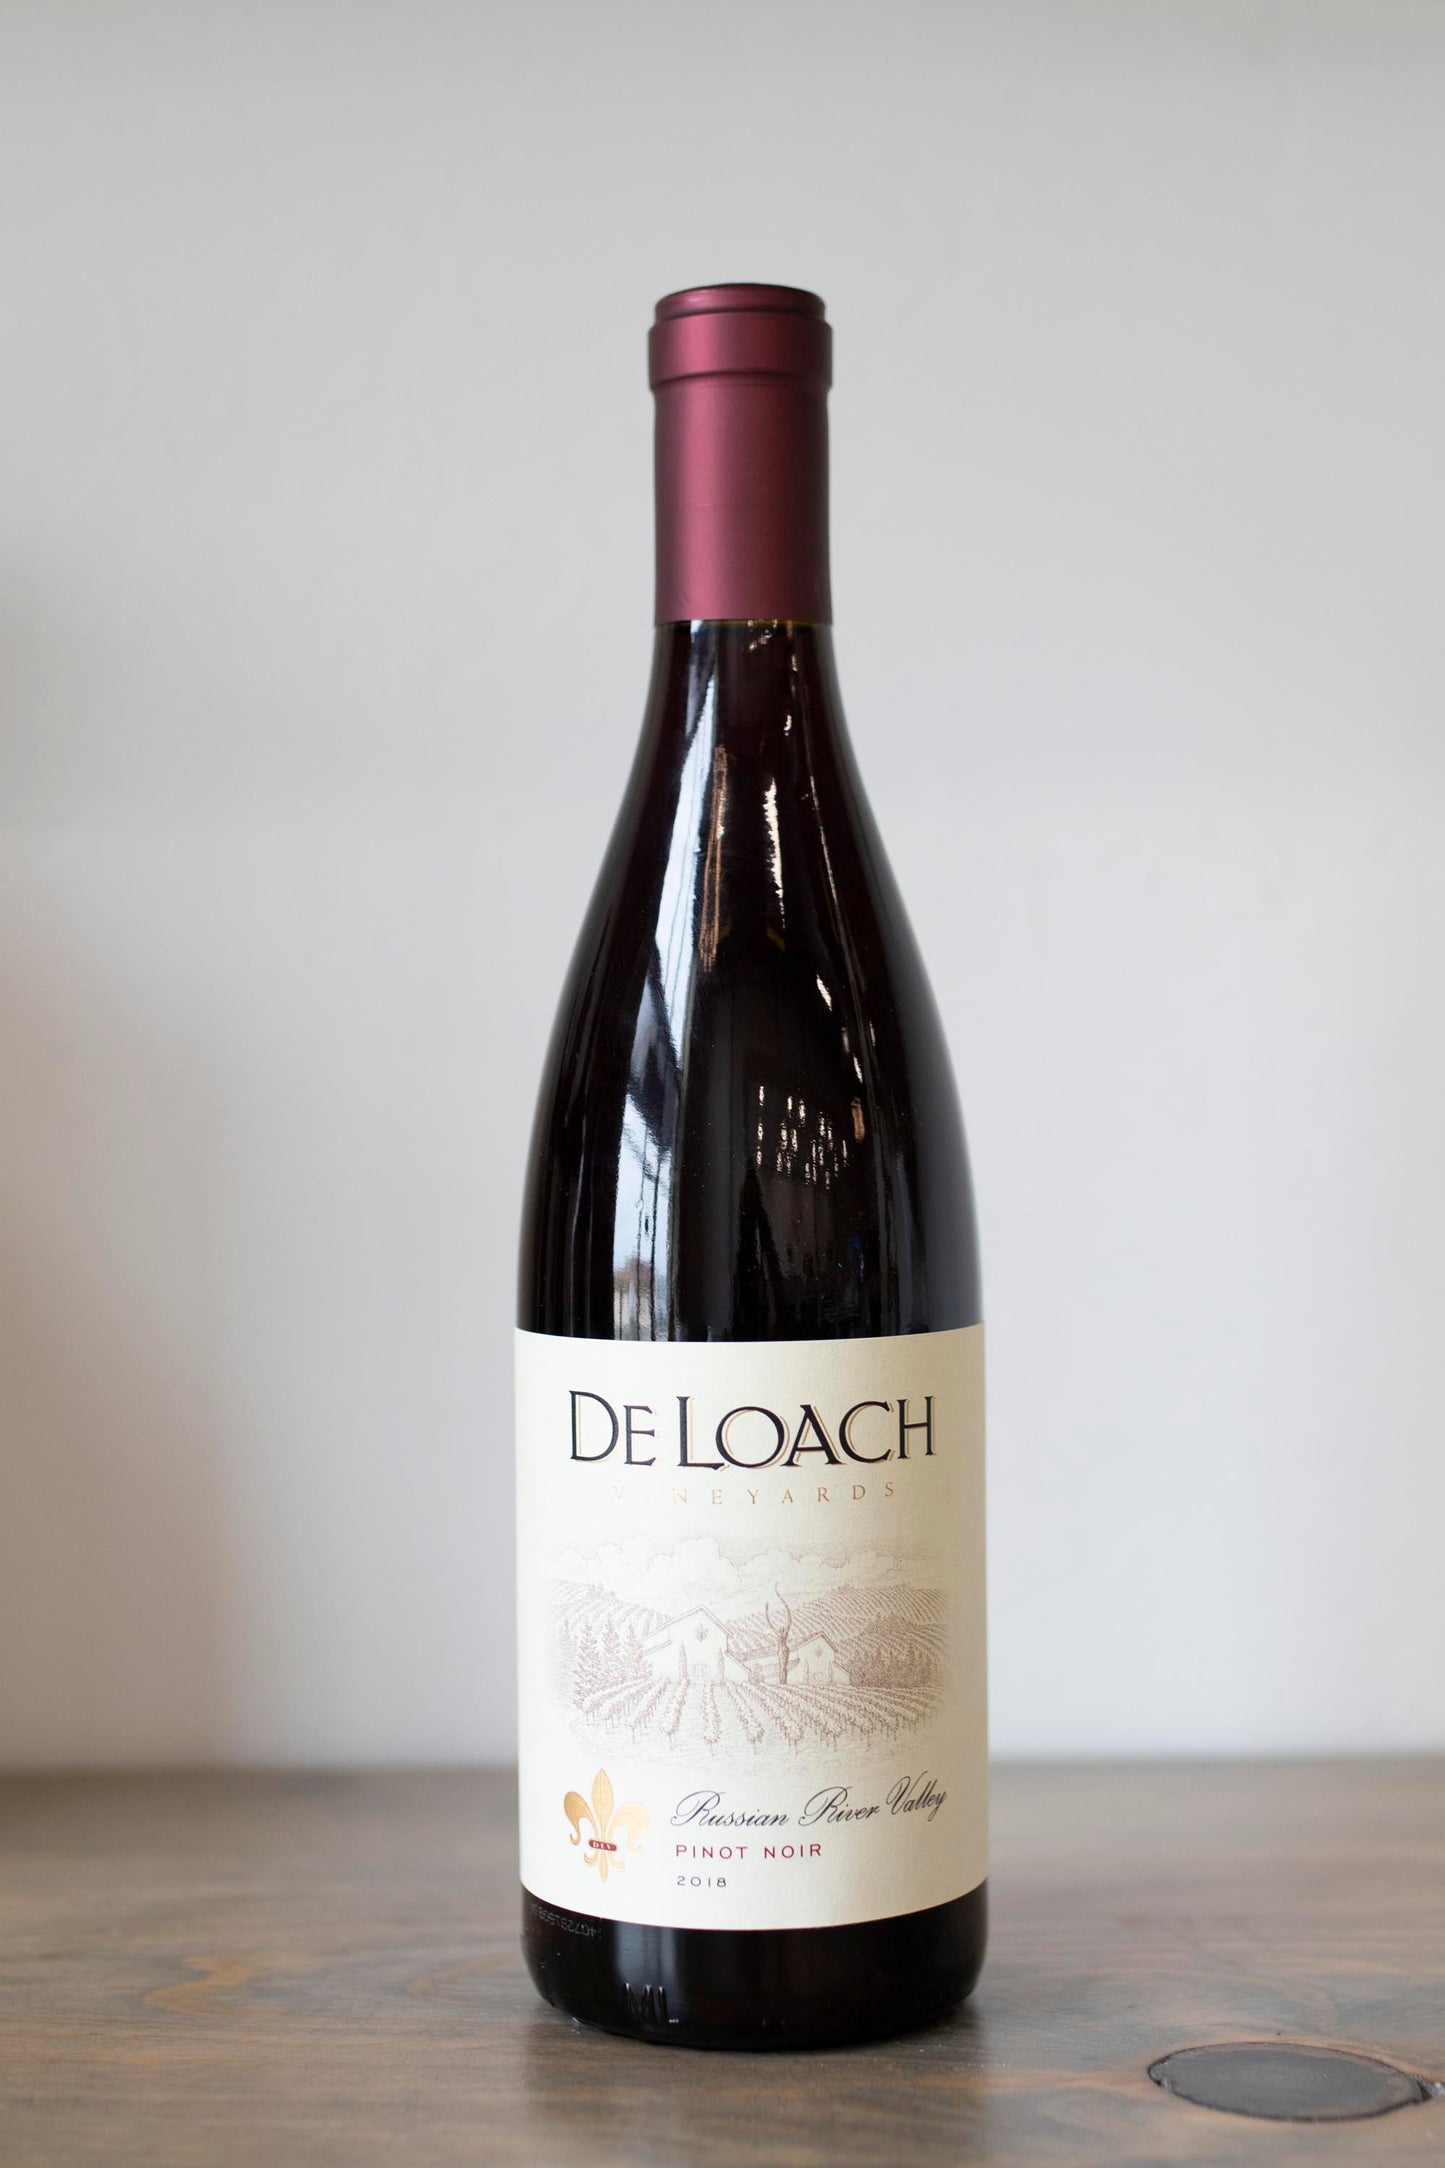 Bottle of Deloach Pinot noir found at Vine & Board in 3809 NW 166th St Suite 1, Edmond, OK 73012